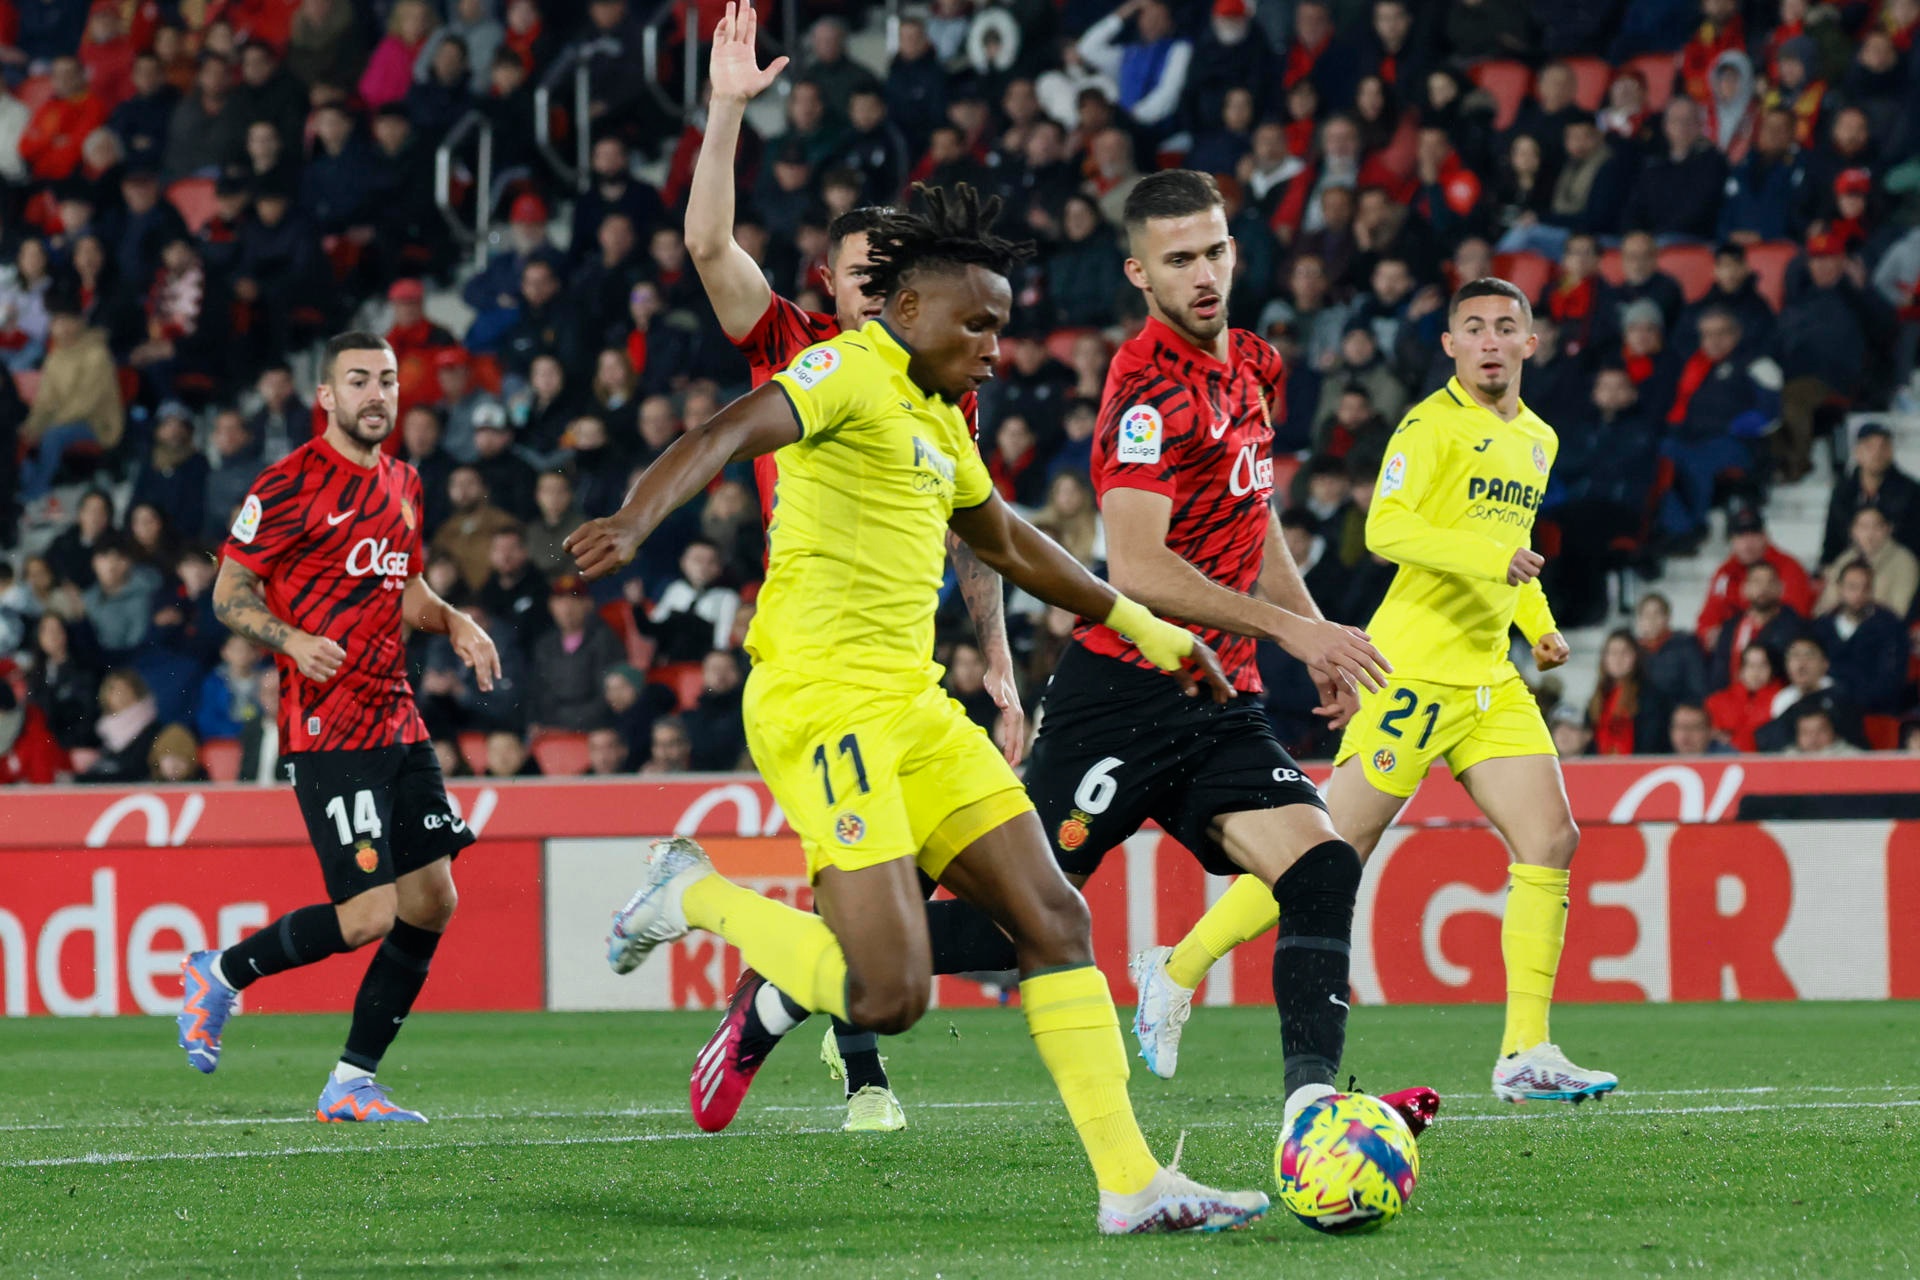 Villarreal lose four consecutive matches after 25 years